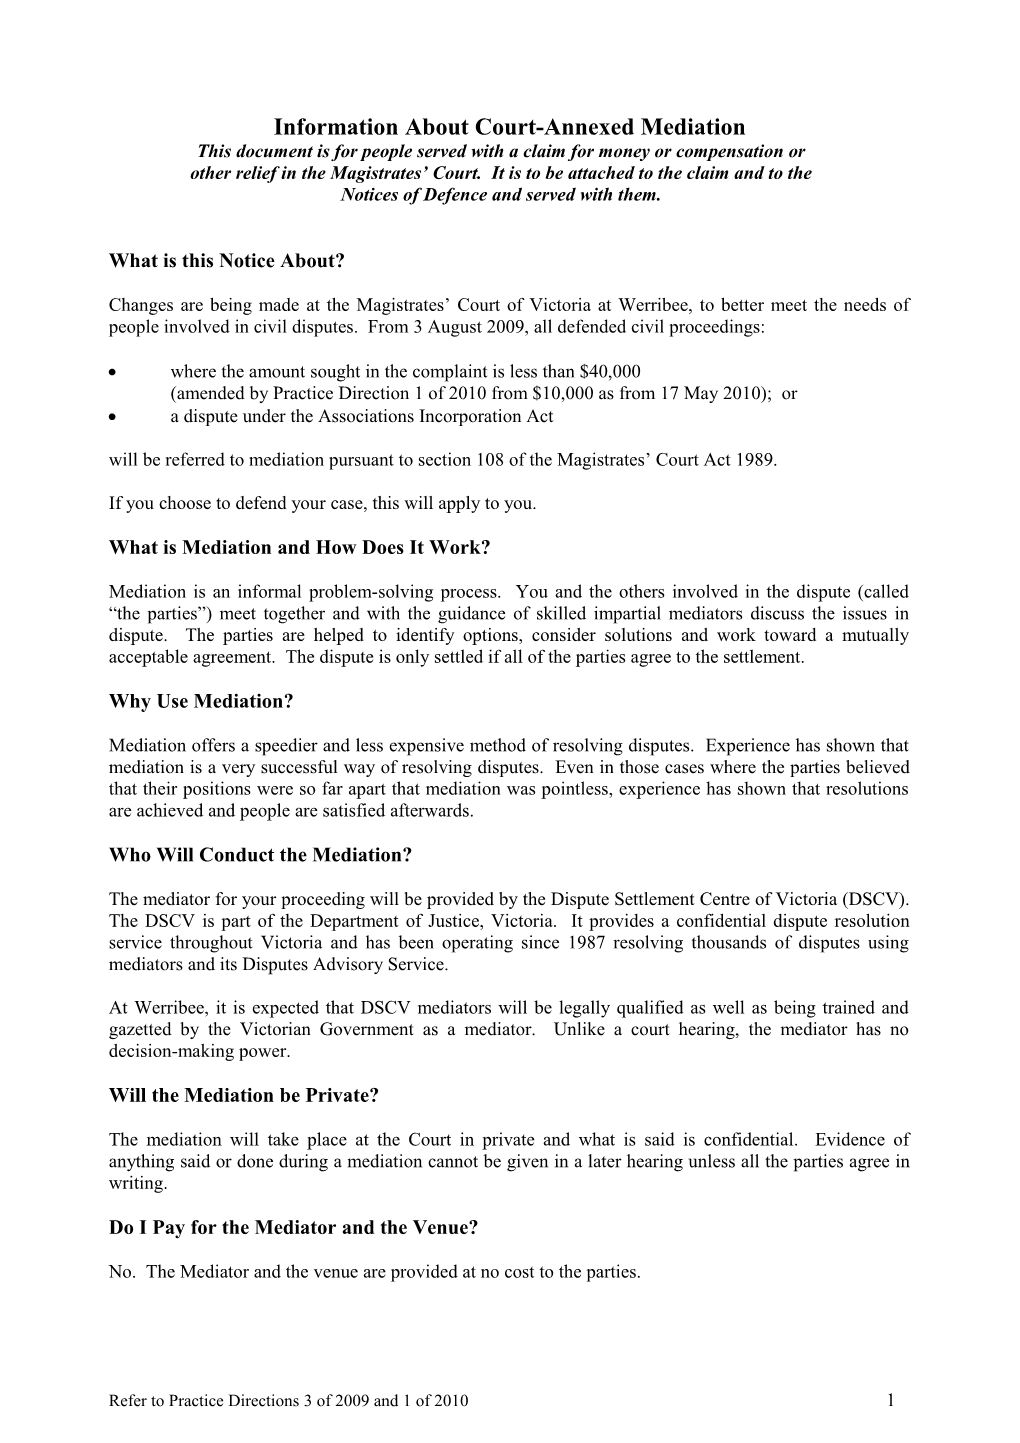 Information About Mediation - Werribee (Word 61 KB - 3 Pages)